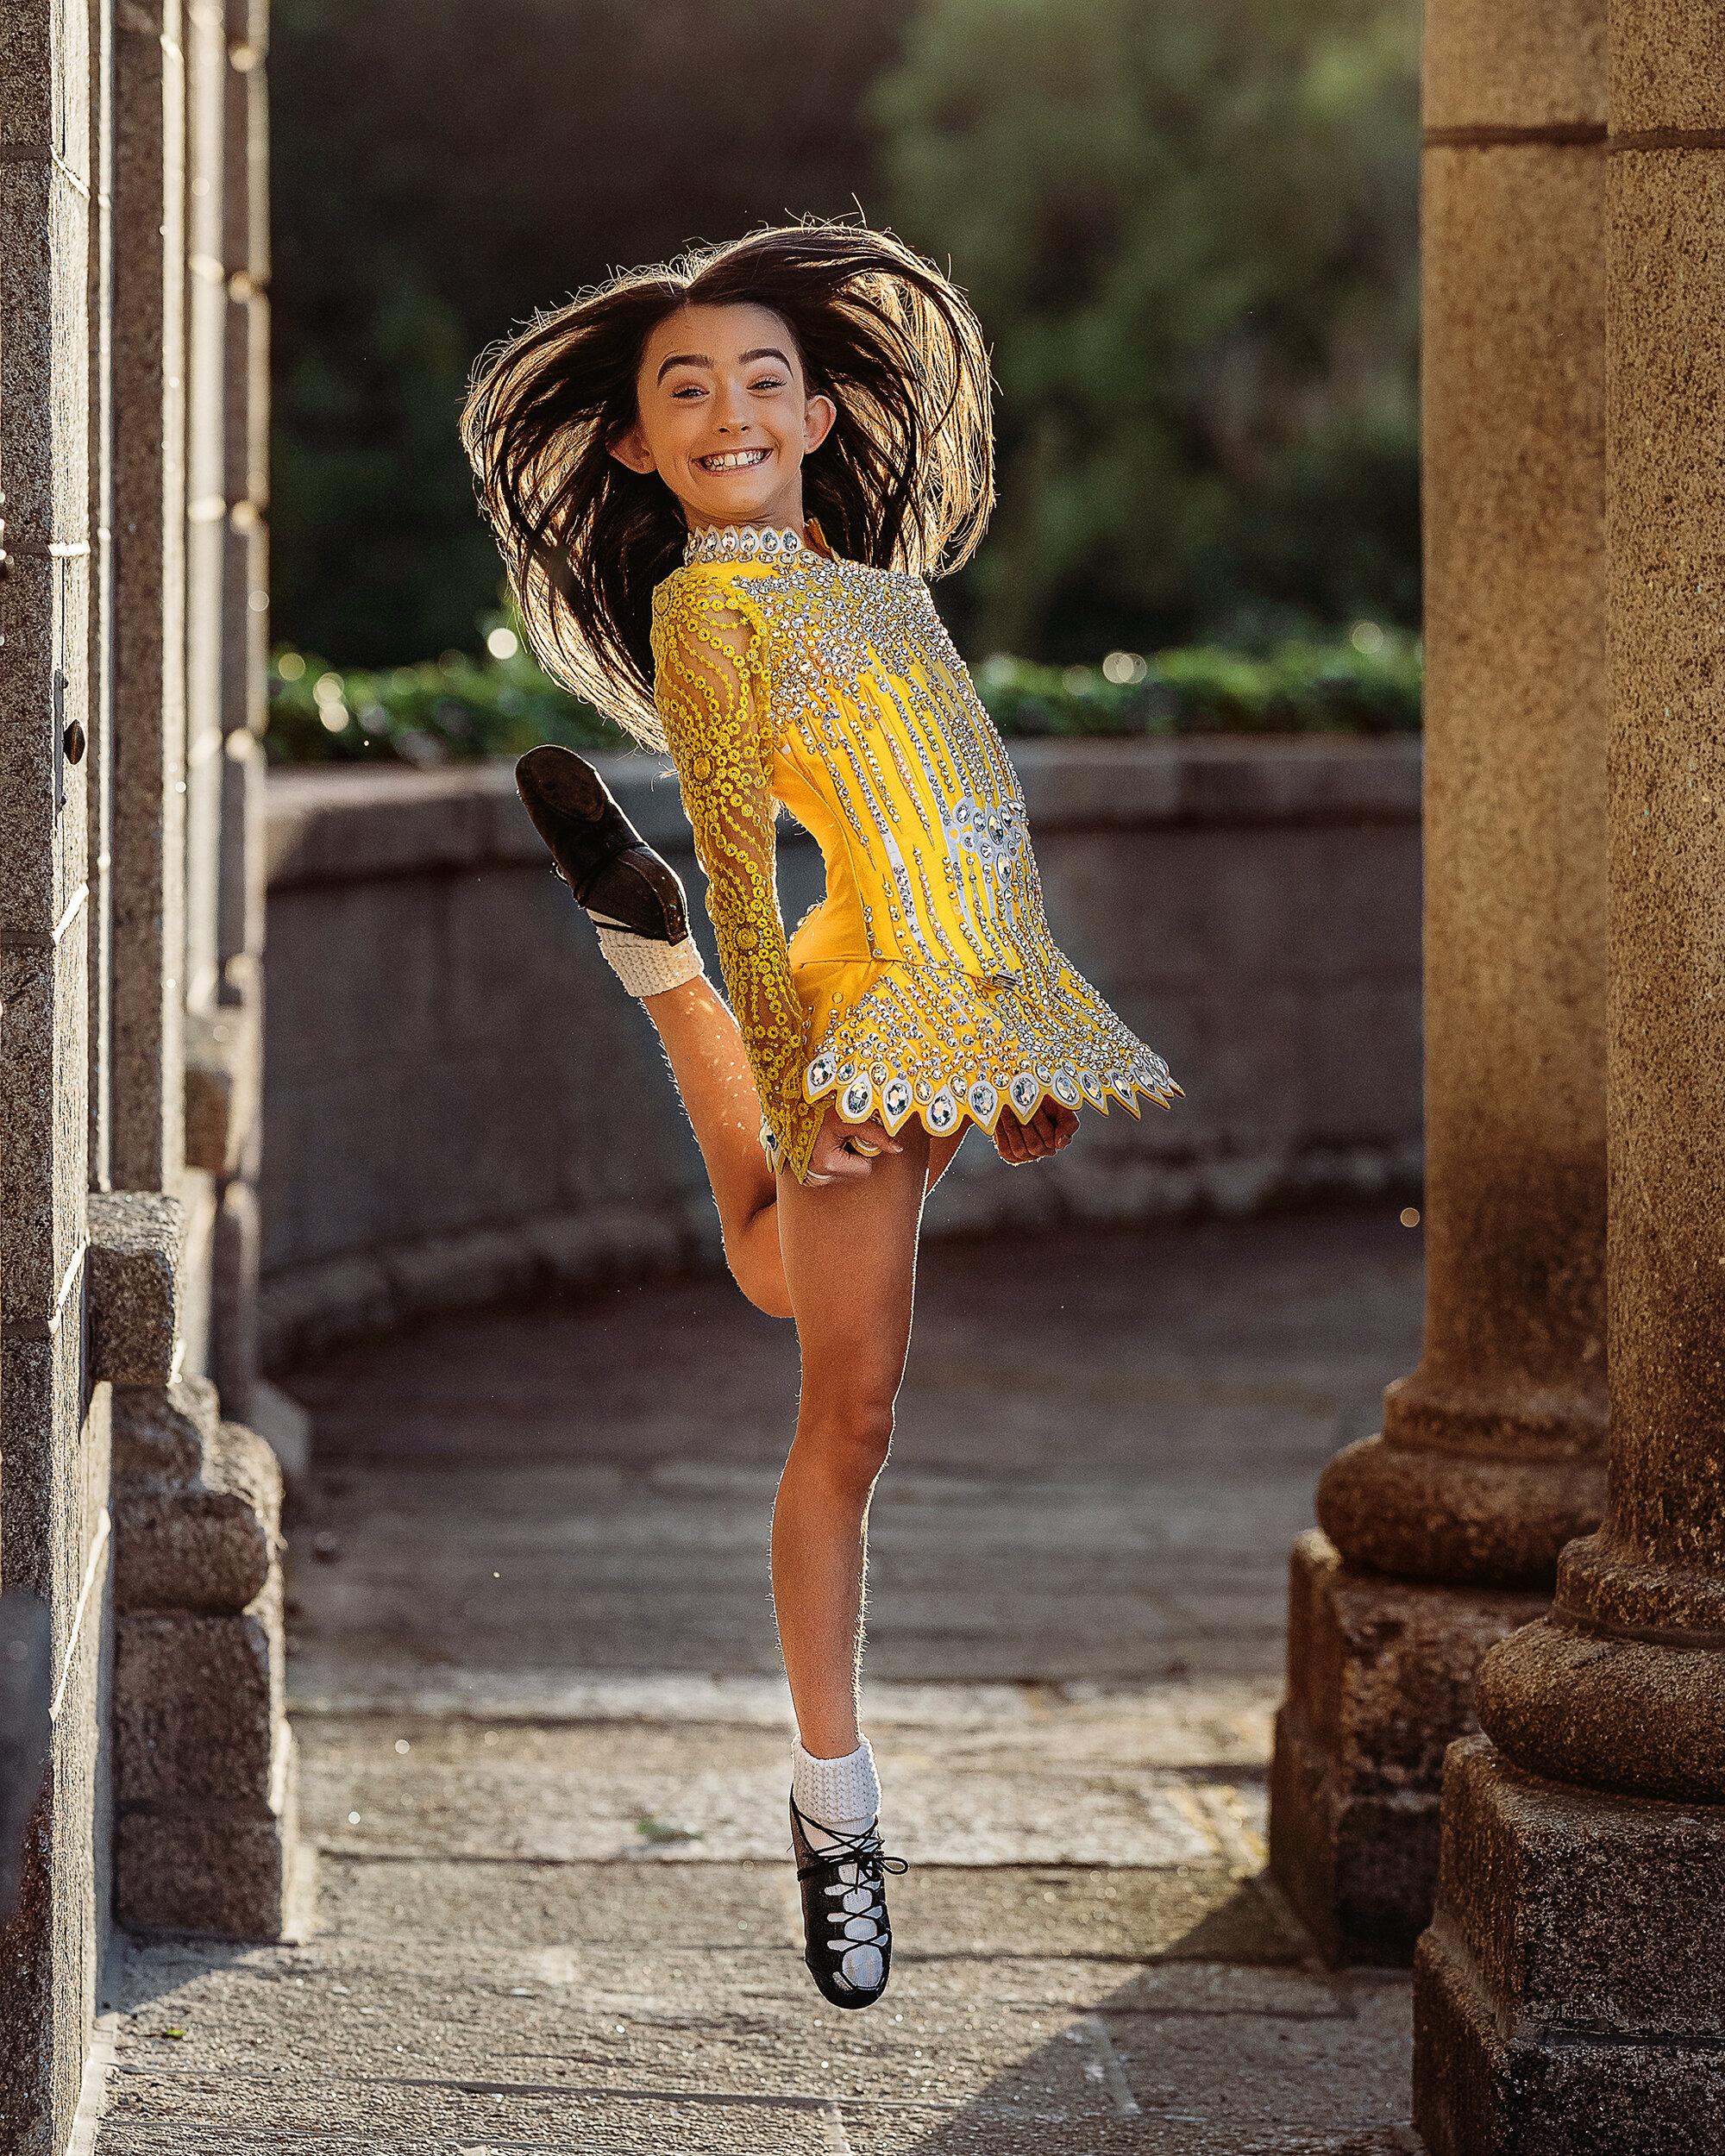 young Irish dancer in sparkling dance dress leaping in the sun